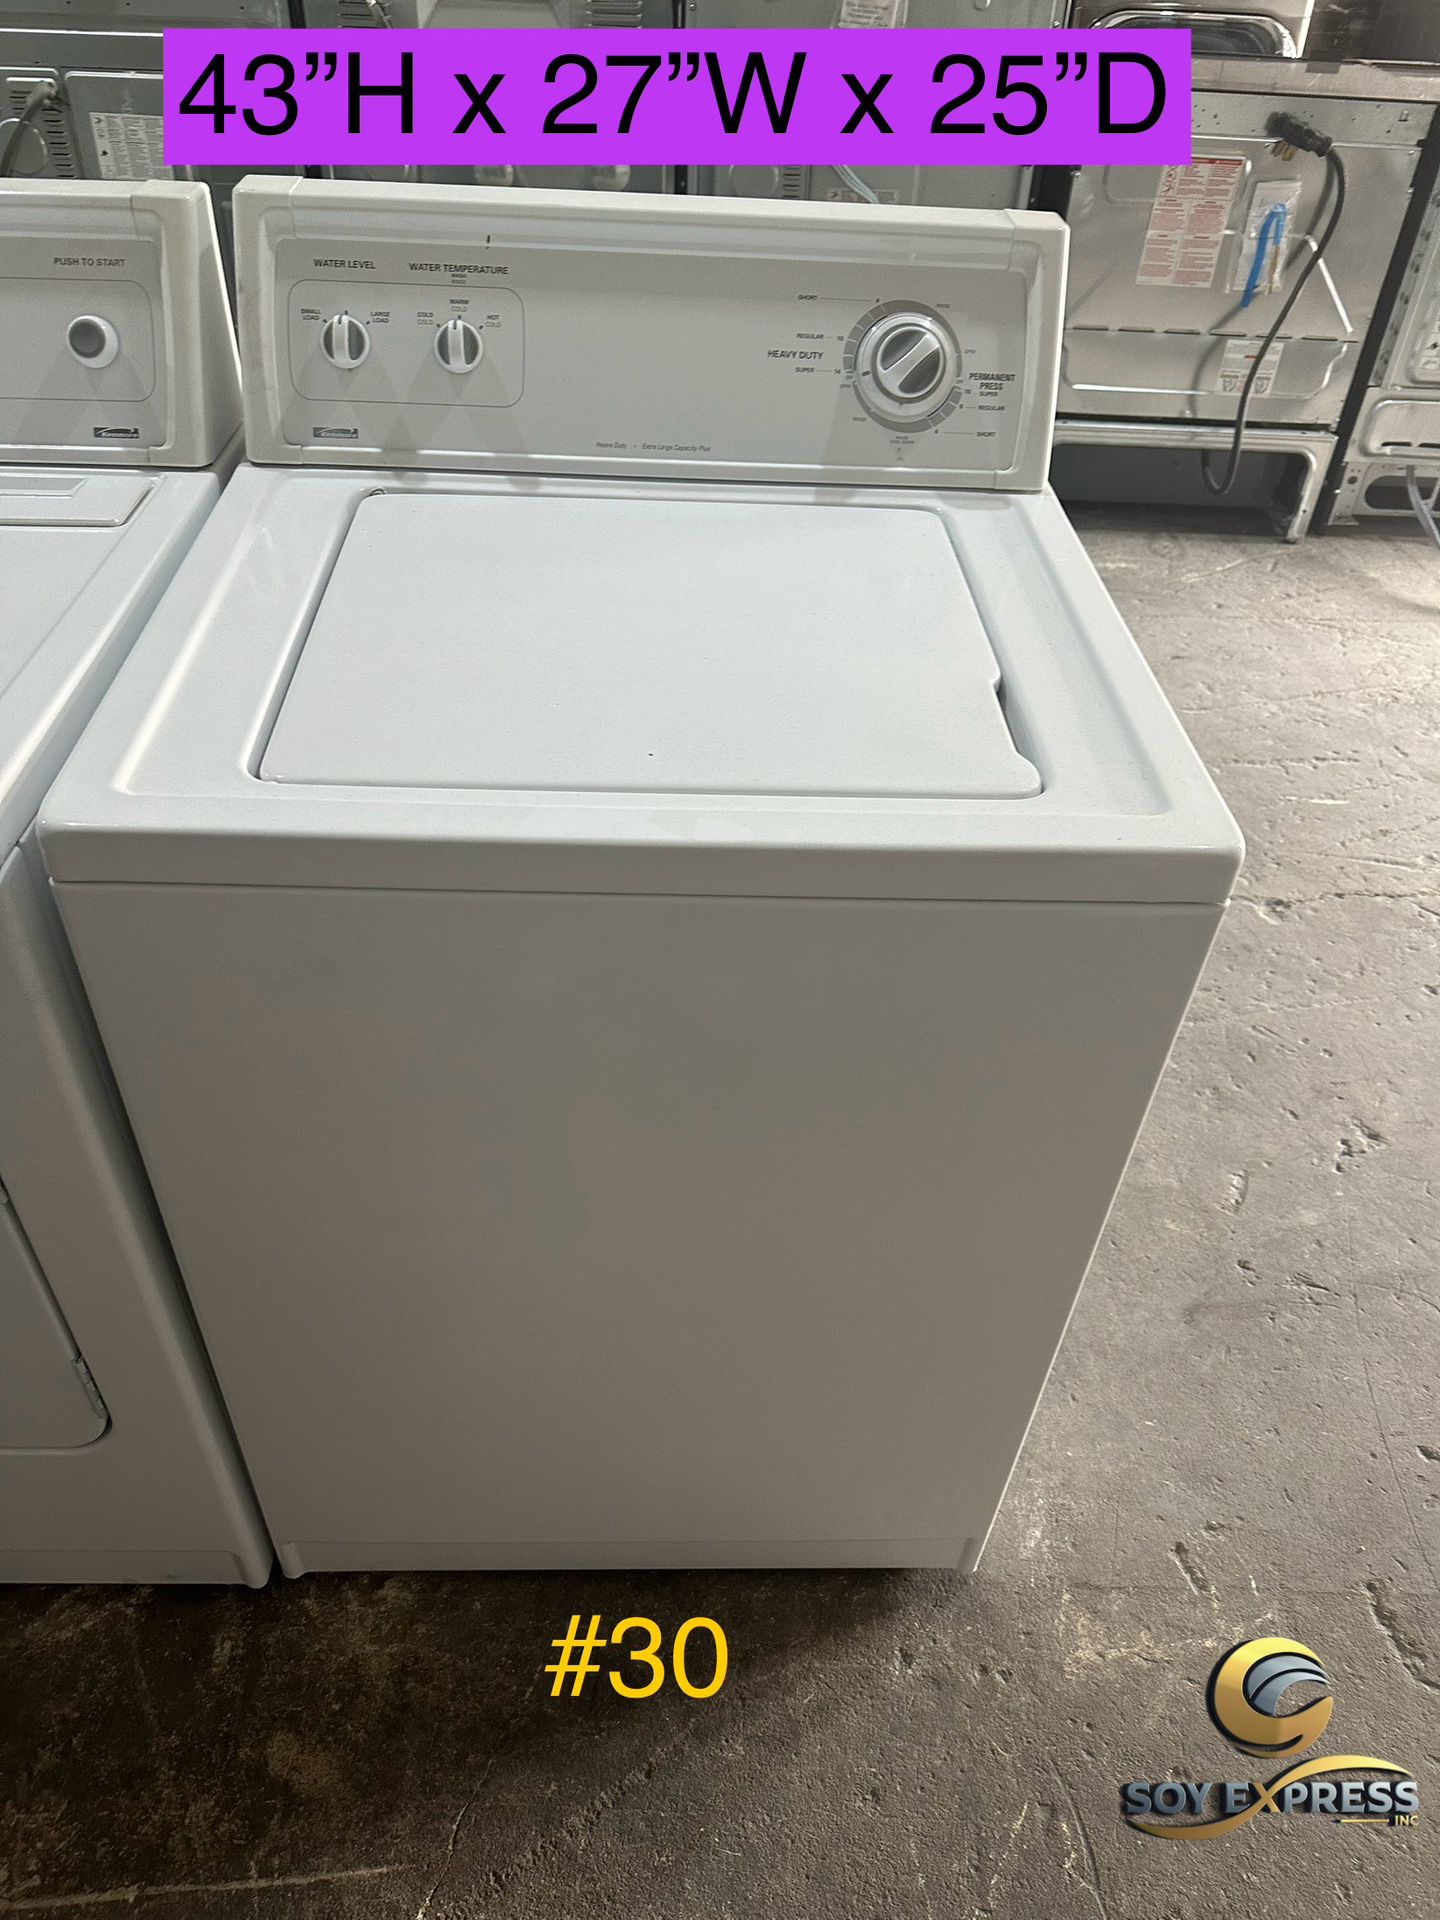 Kenmore Washer Electric (#30) 🚨$200 For PICKUP🚨$250 For DELIVERY🚨